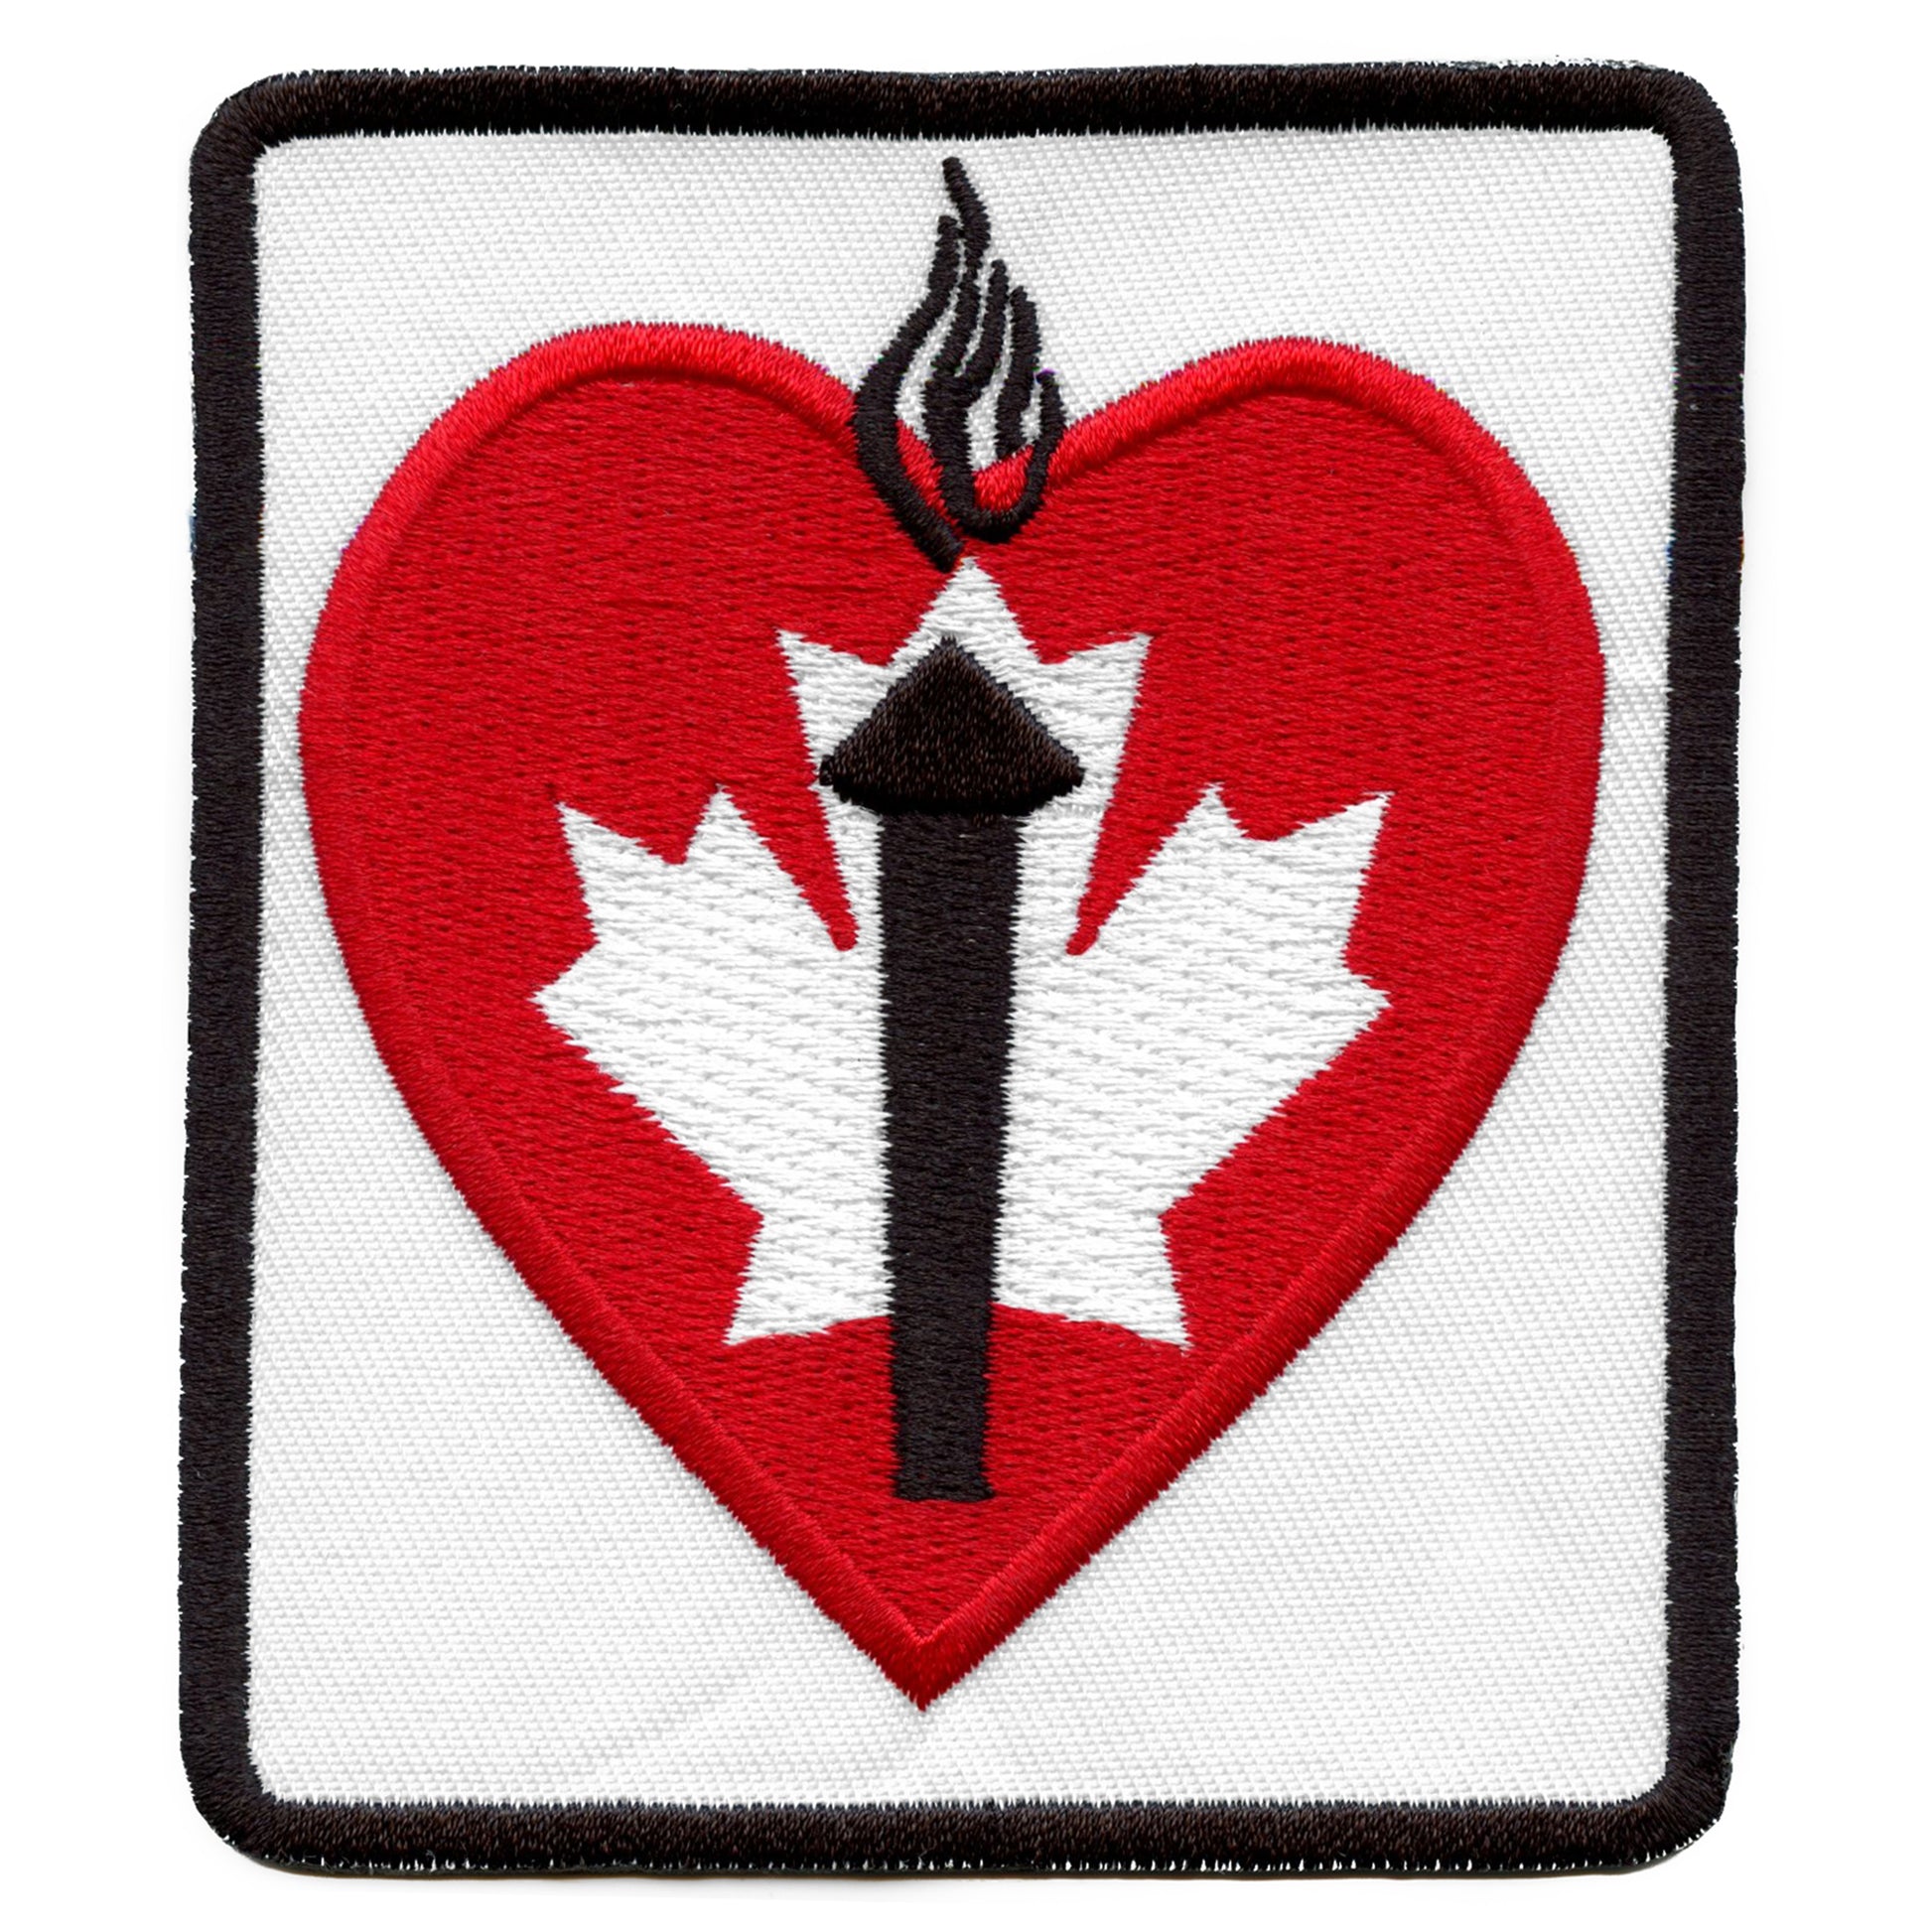 Heart and Stroke Toronto Maple Leafs Memorial Patch (1986-87) 